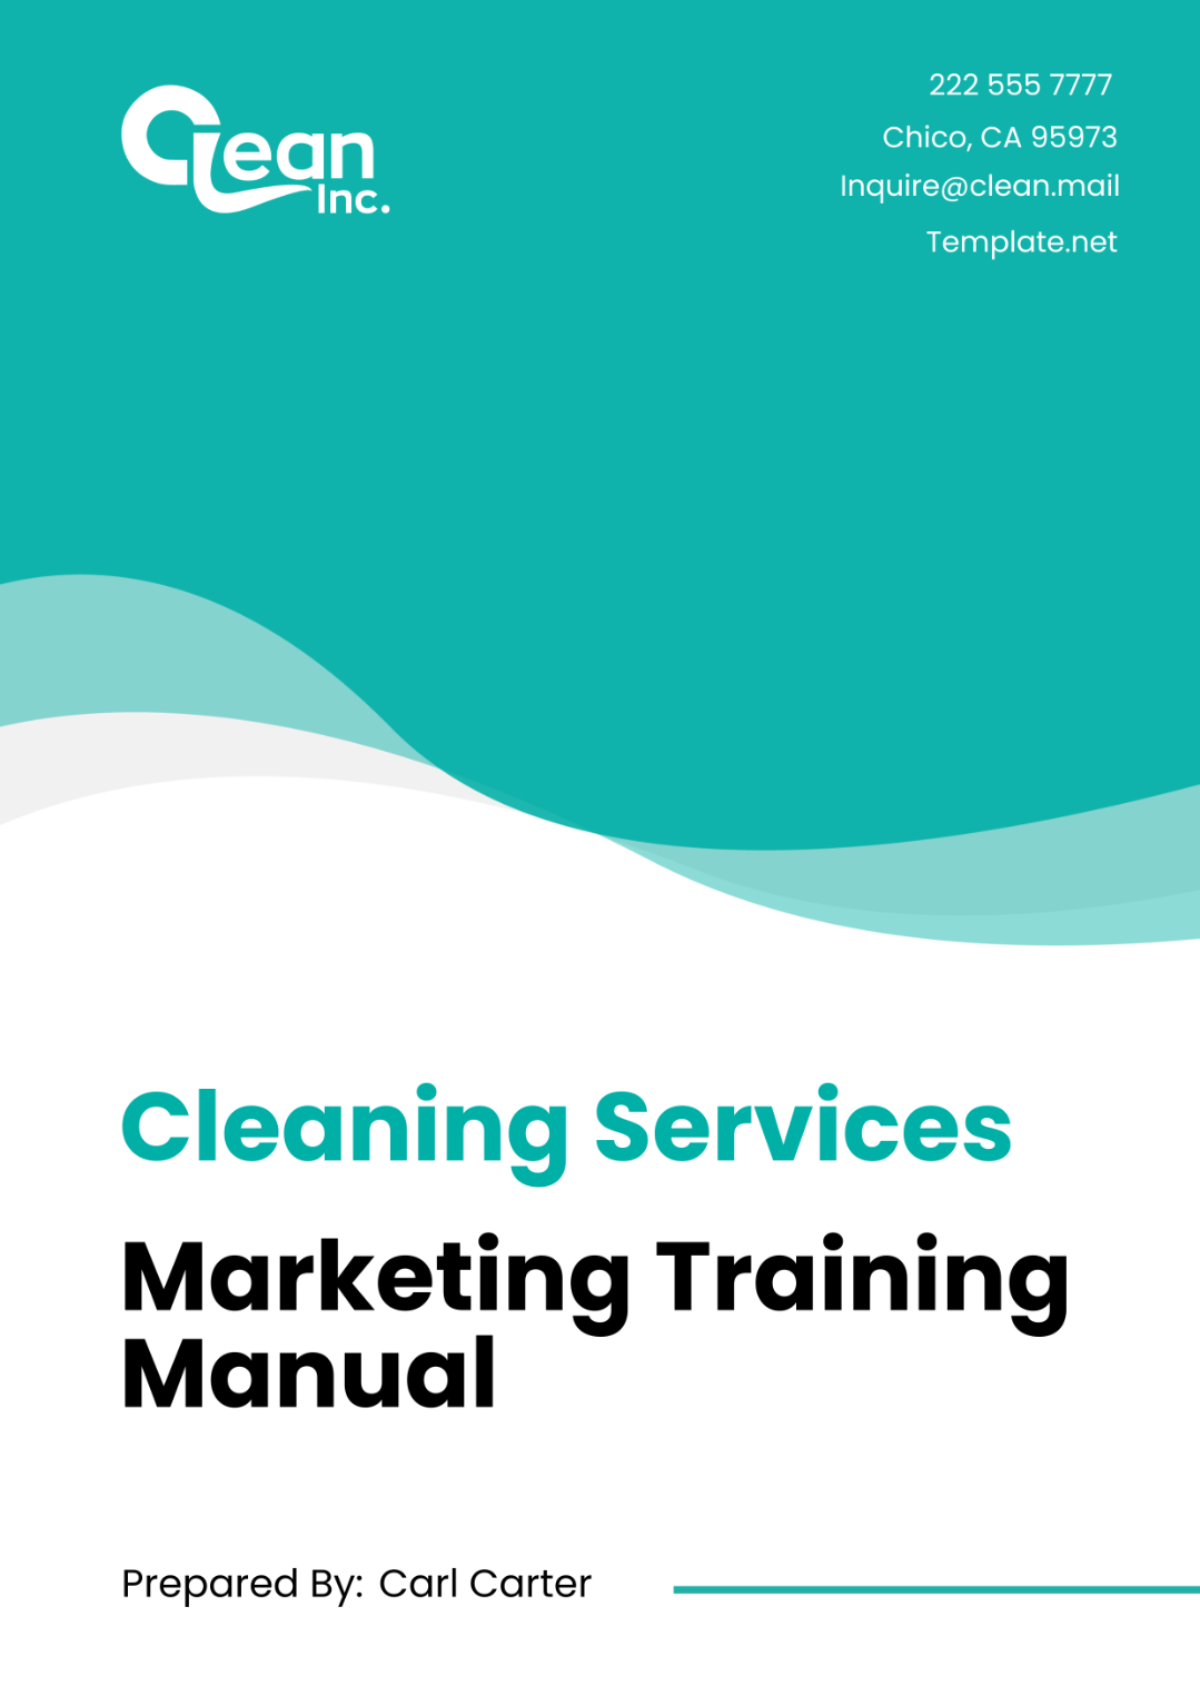 Cleaning Services Marketing Training Manual Template